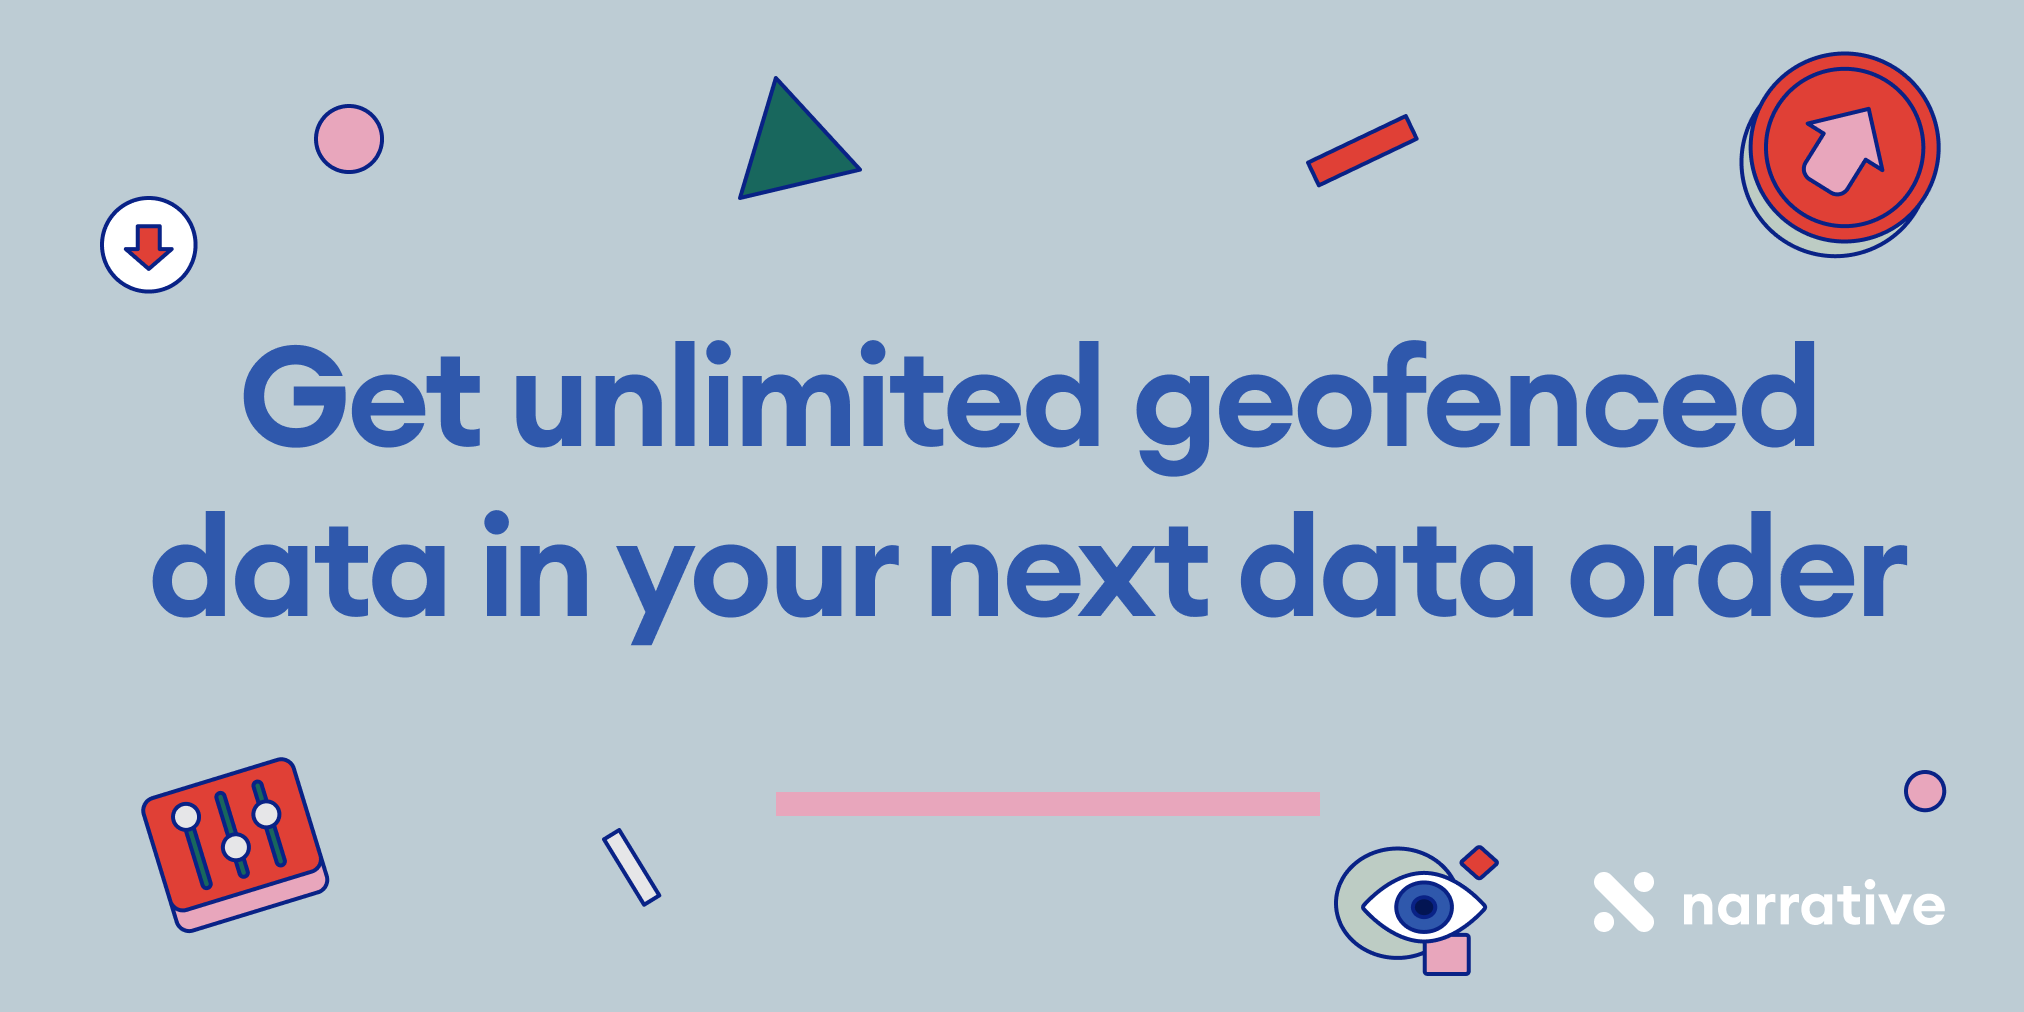 Get unlimited geofenced data in your next data order